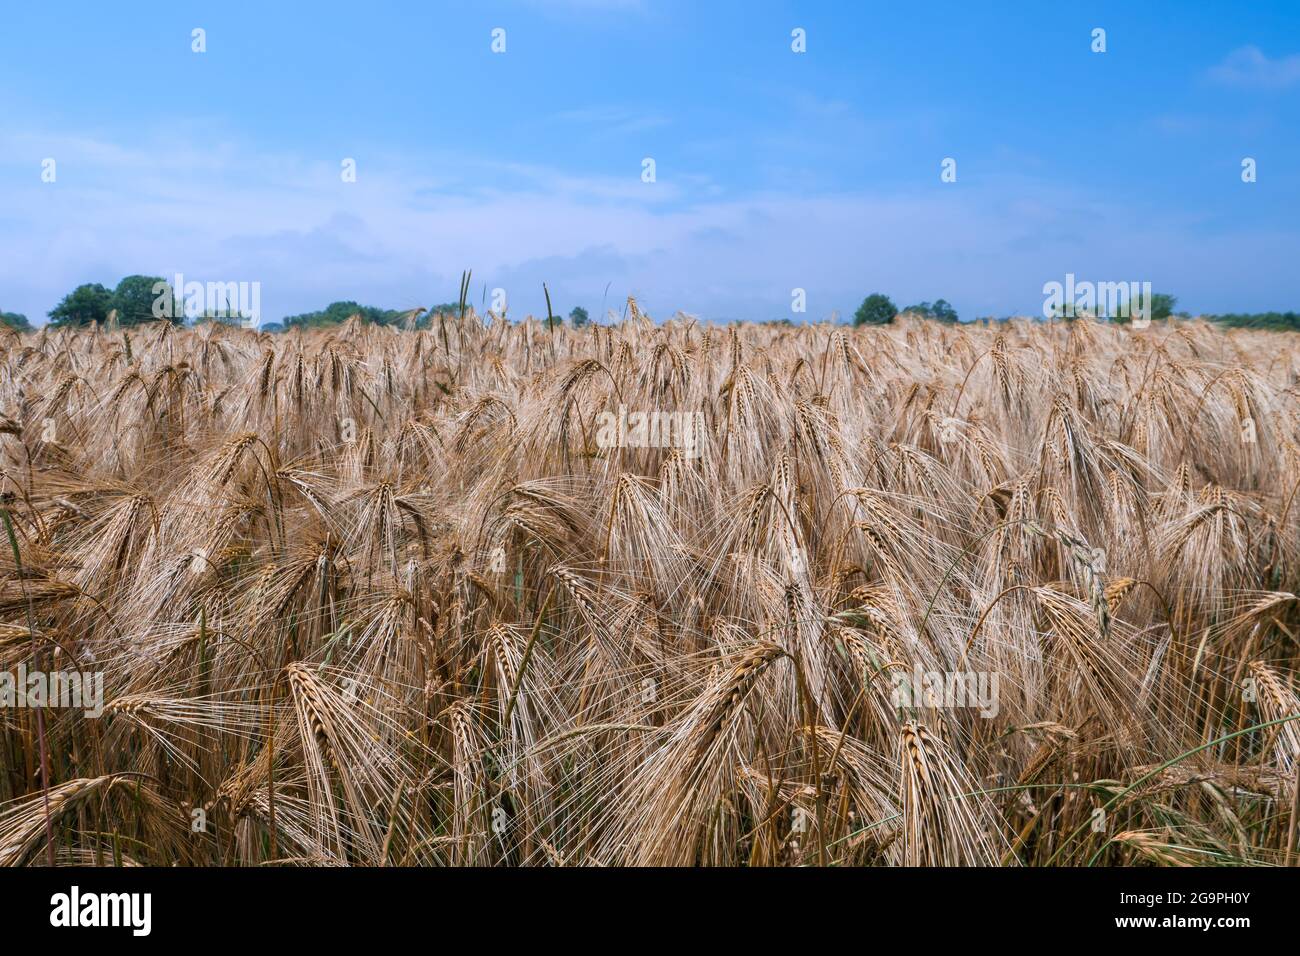 A crop of ripe barley (Hordeum vulgare) growing in a farm field in the UK in the summer sunshine, ready for harvesting. Stock Photo